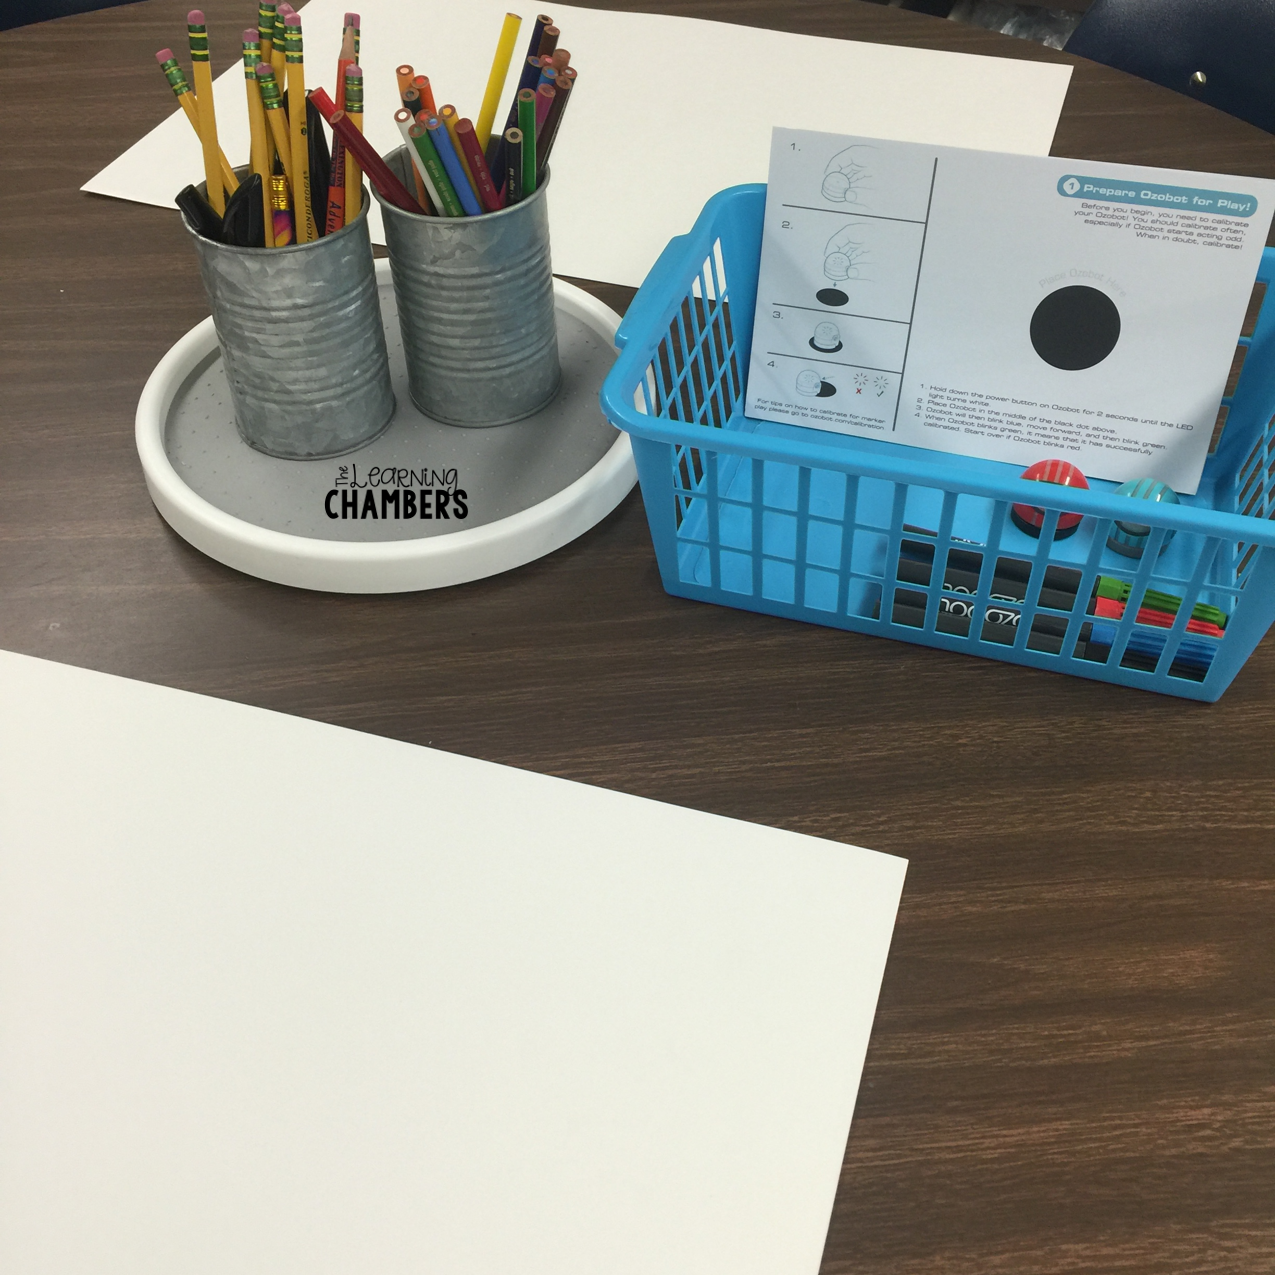 How to Integrate Ozobots with Math {Part 1} - The Learning Chambers